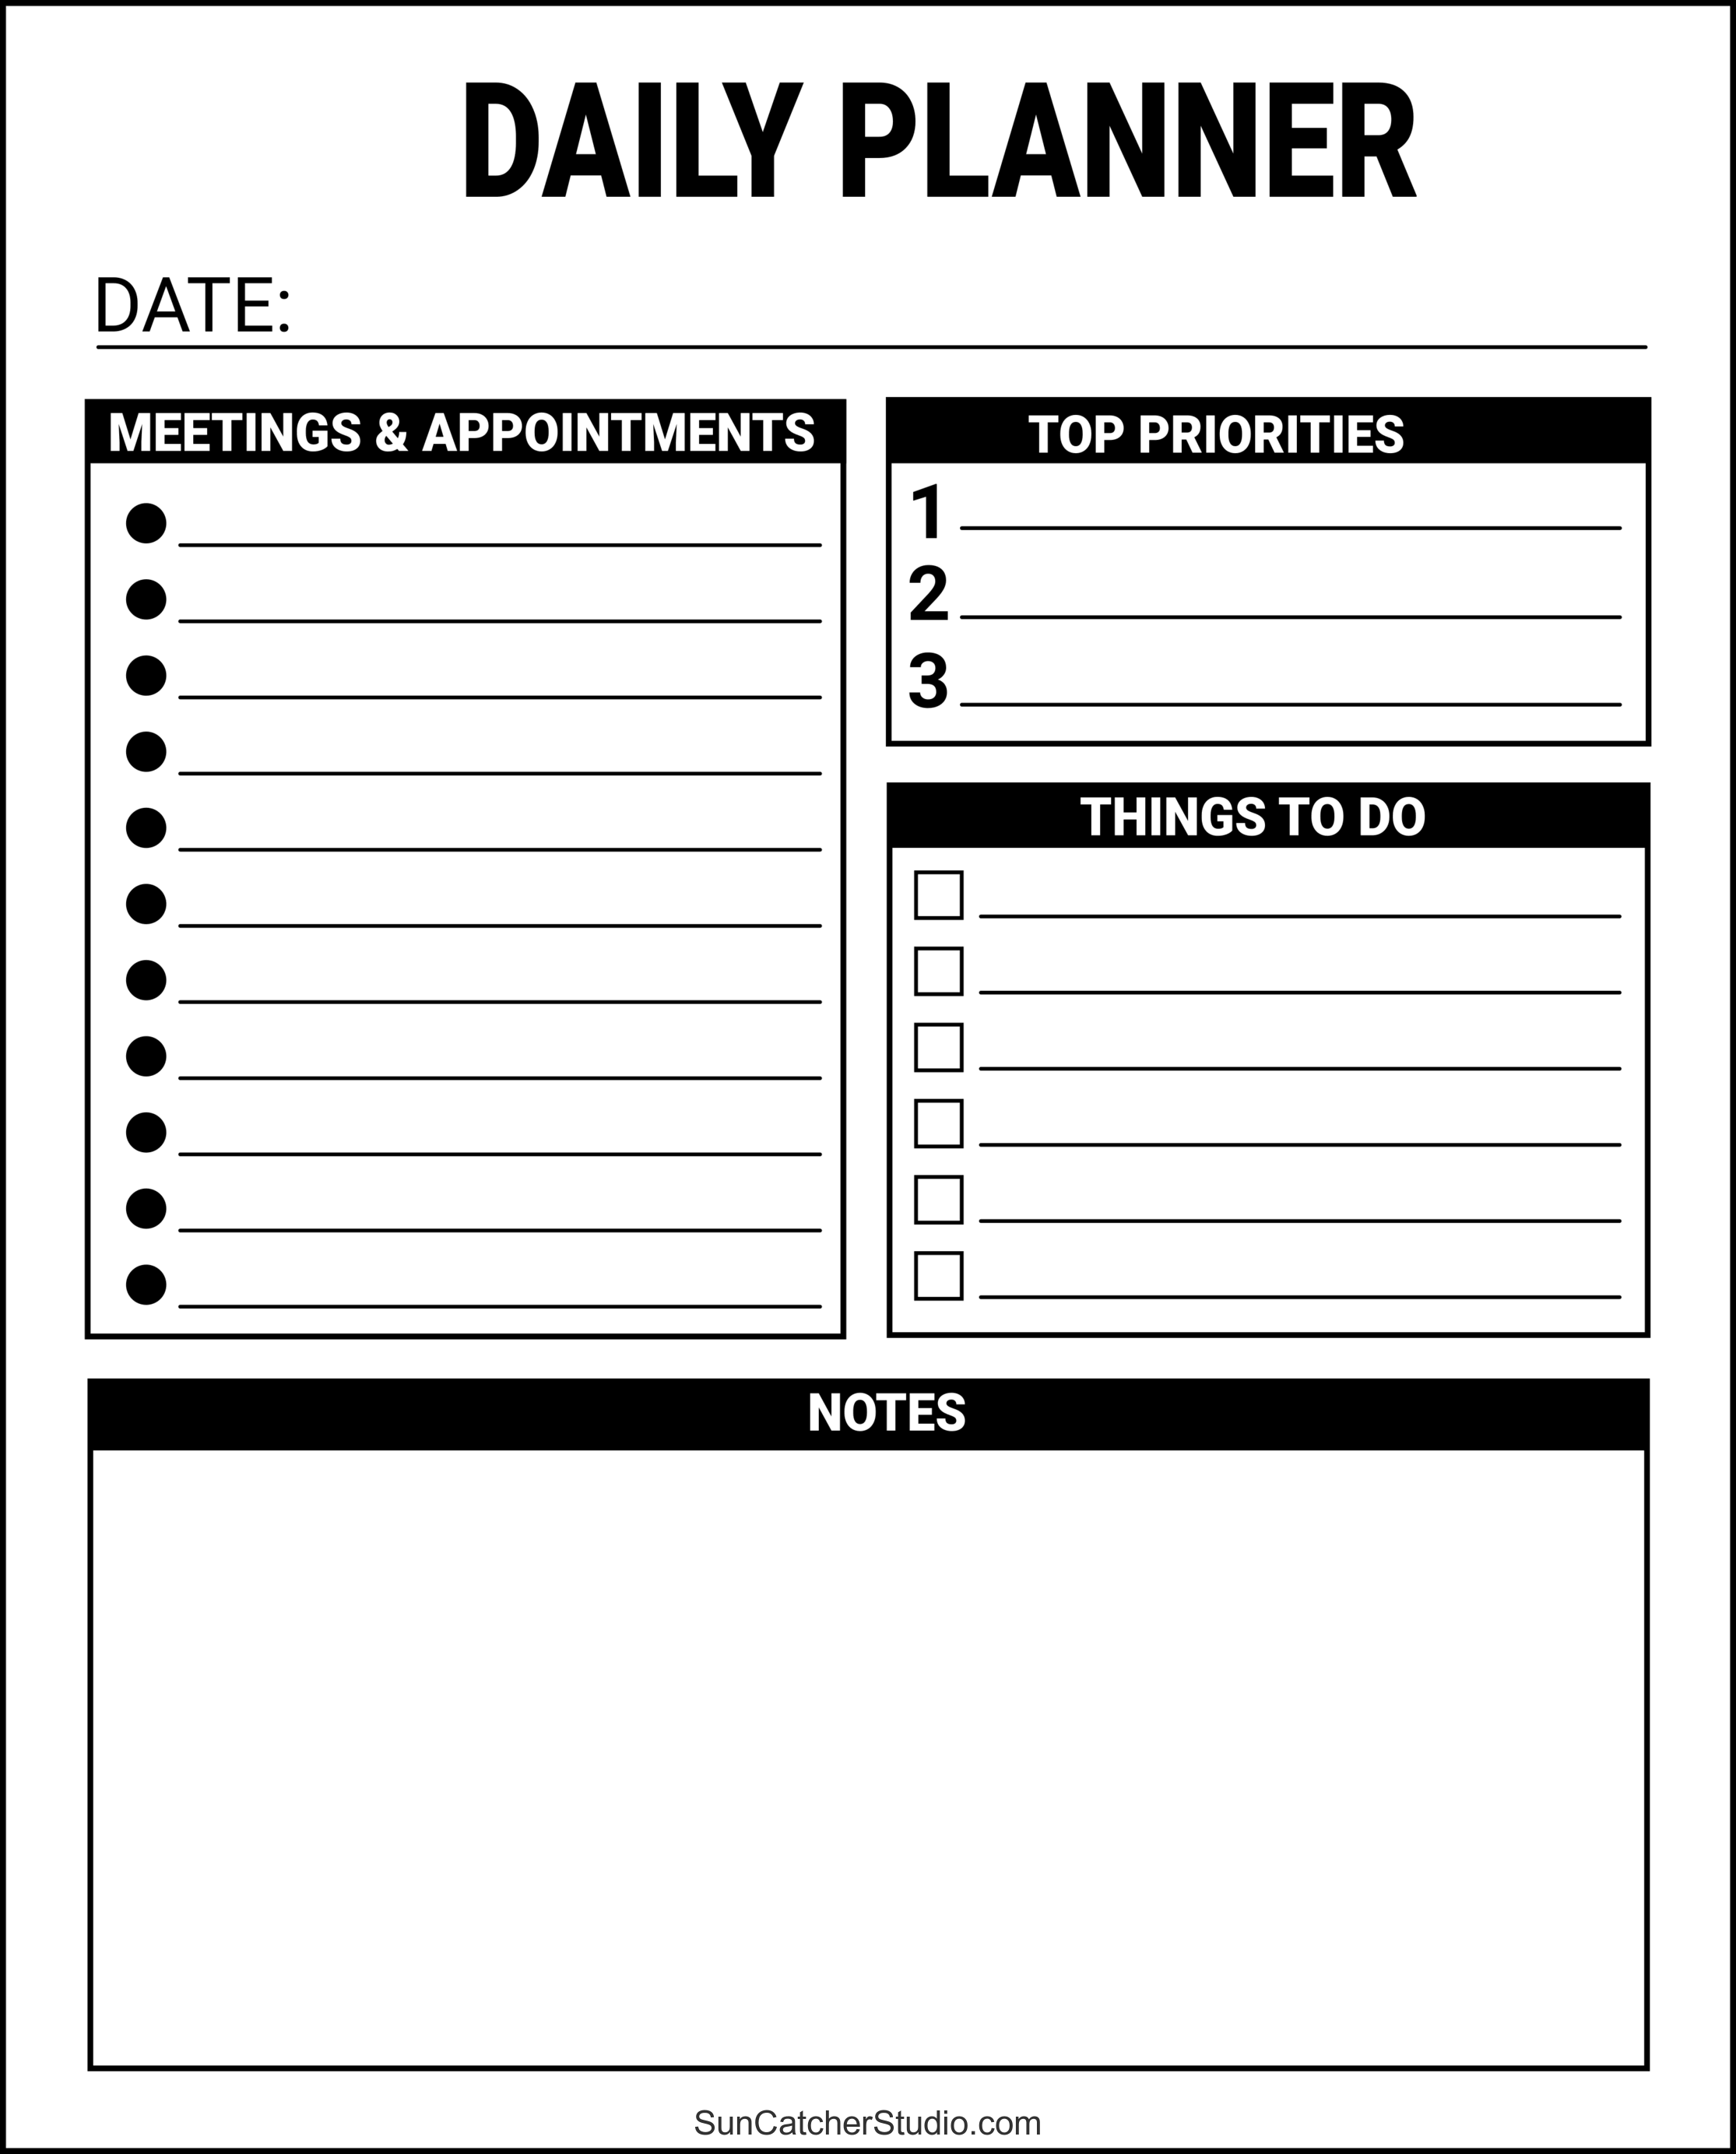 Daily Planner Templates Printable - Download PDF